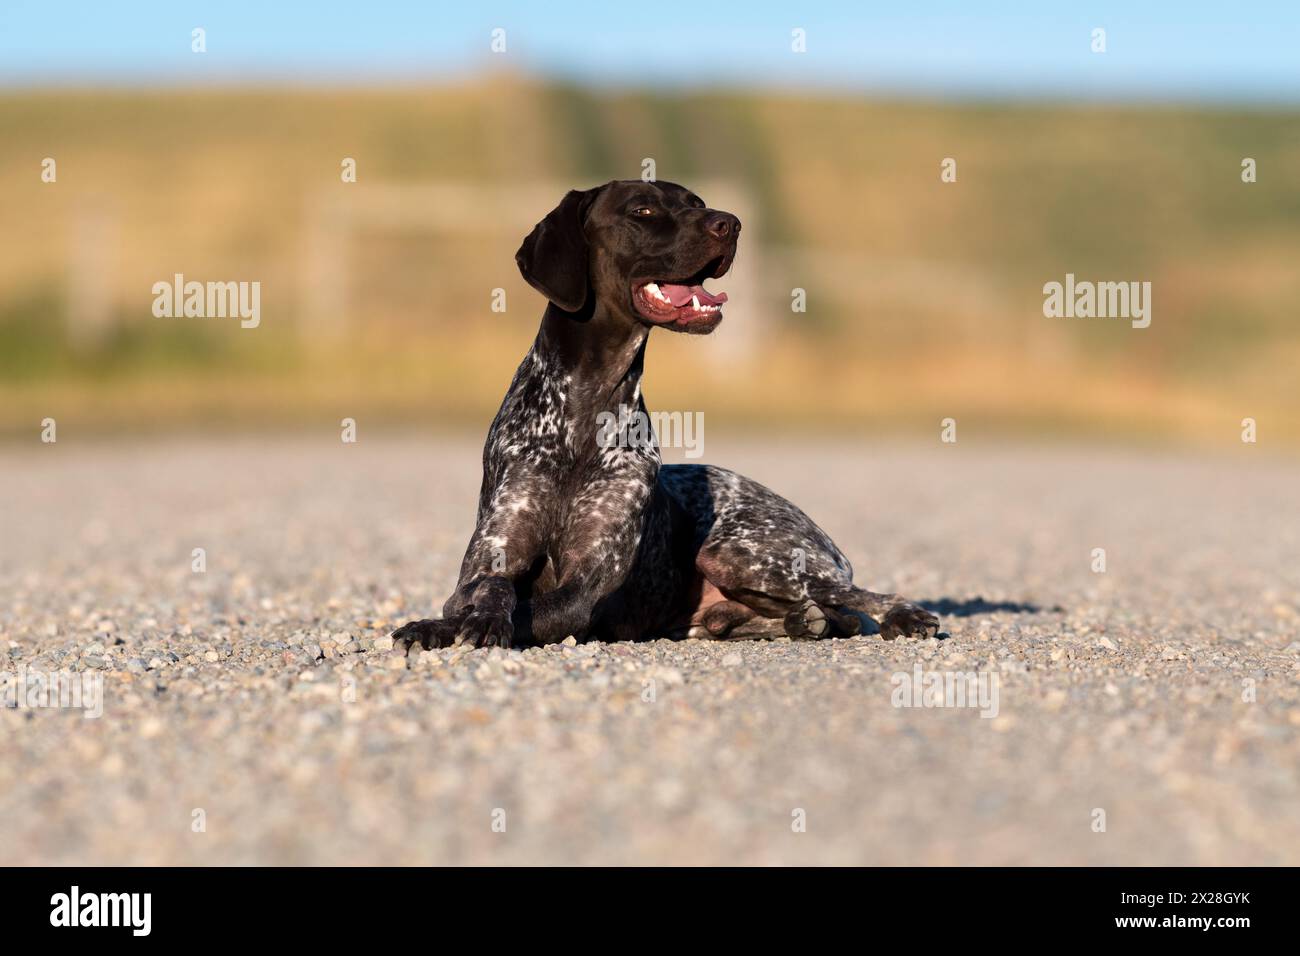 German short haired pointer ( GSP ) liver roan & ticked coat. Posing for portraits down a backroad on the southern Alberta prairies. Stock Photo